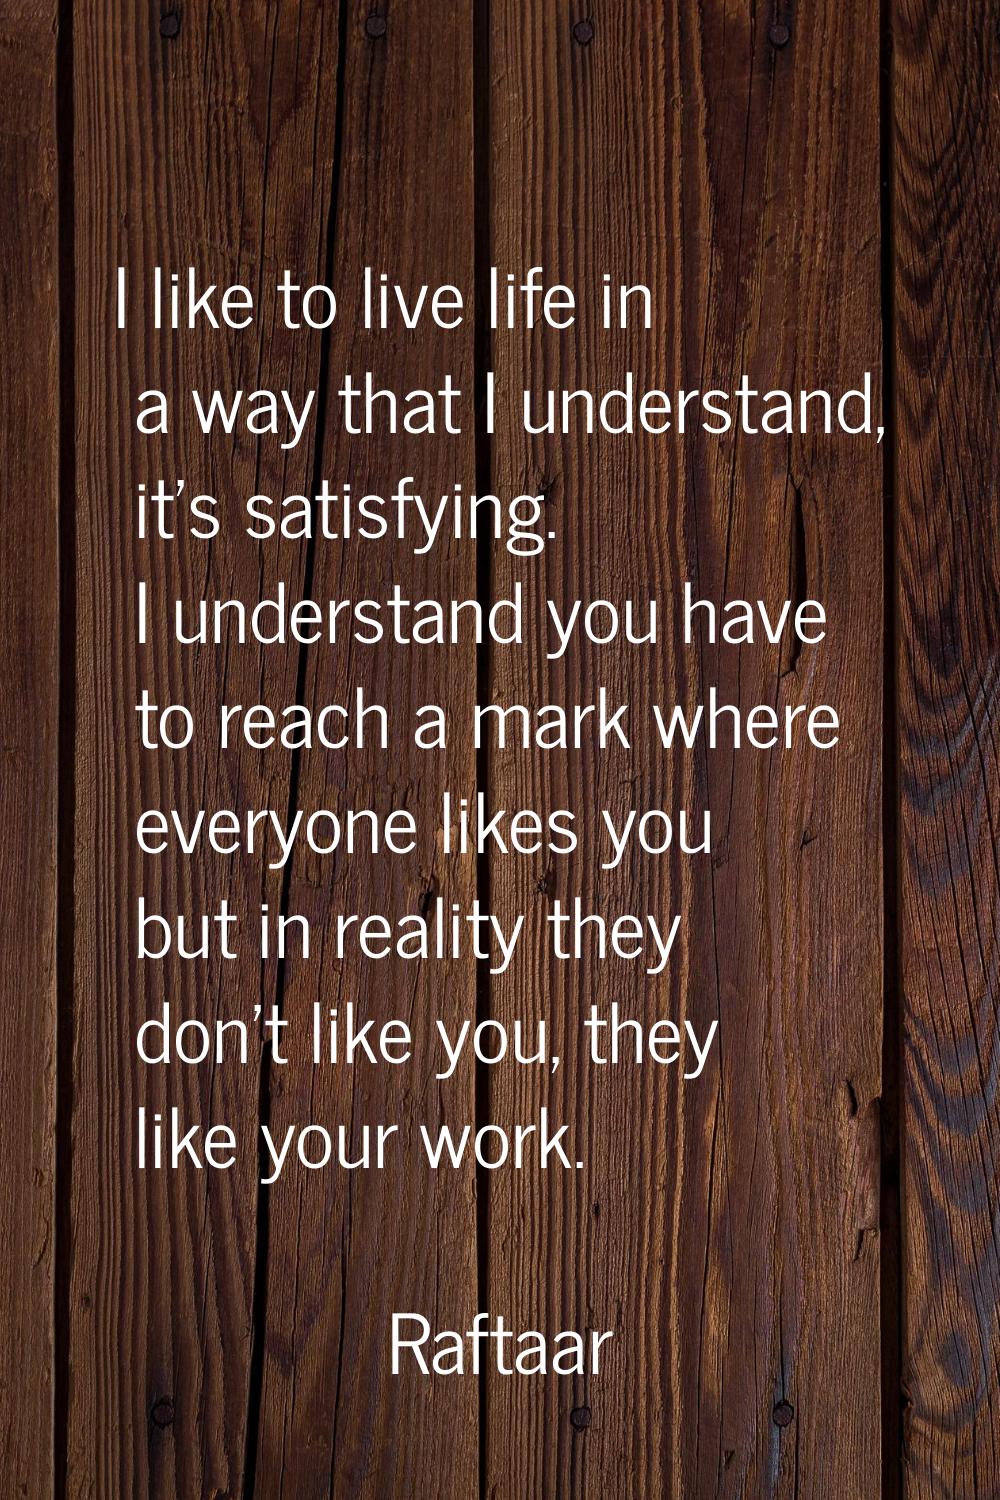 I like to live life in a way that I understand, it's satisfying. I understand you have to reach a m